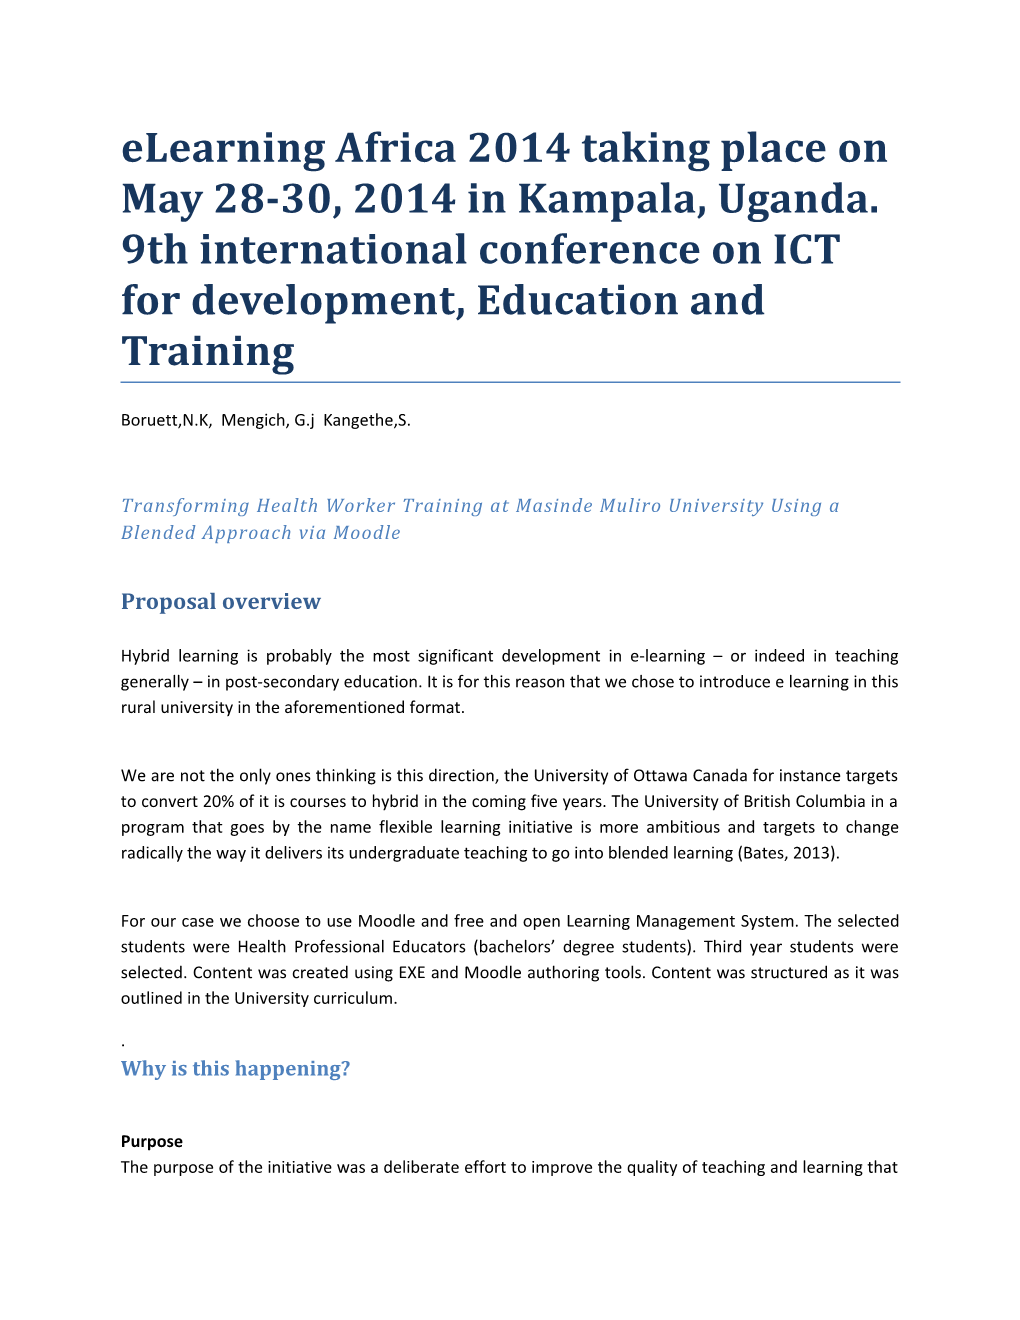 Transforming Health Worker Training at Masindemuliro University Using a Blended Approach